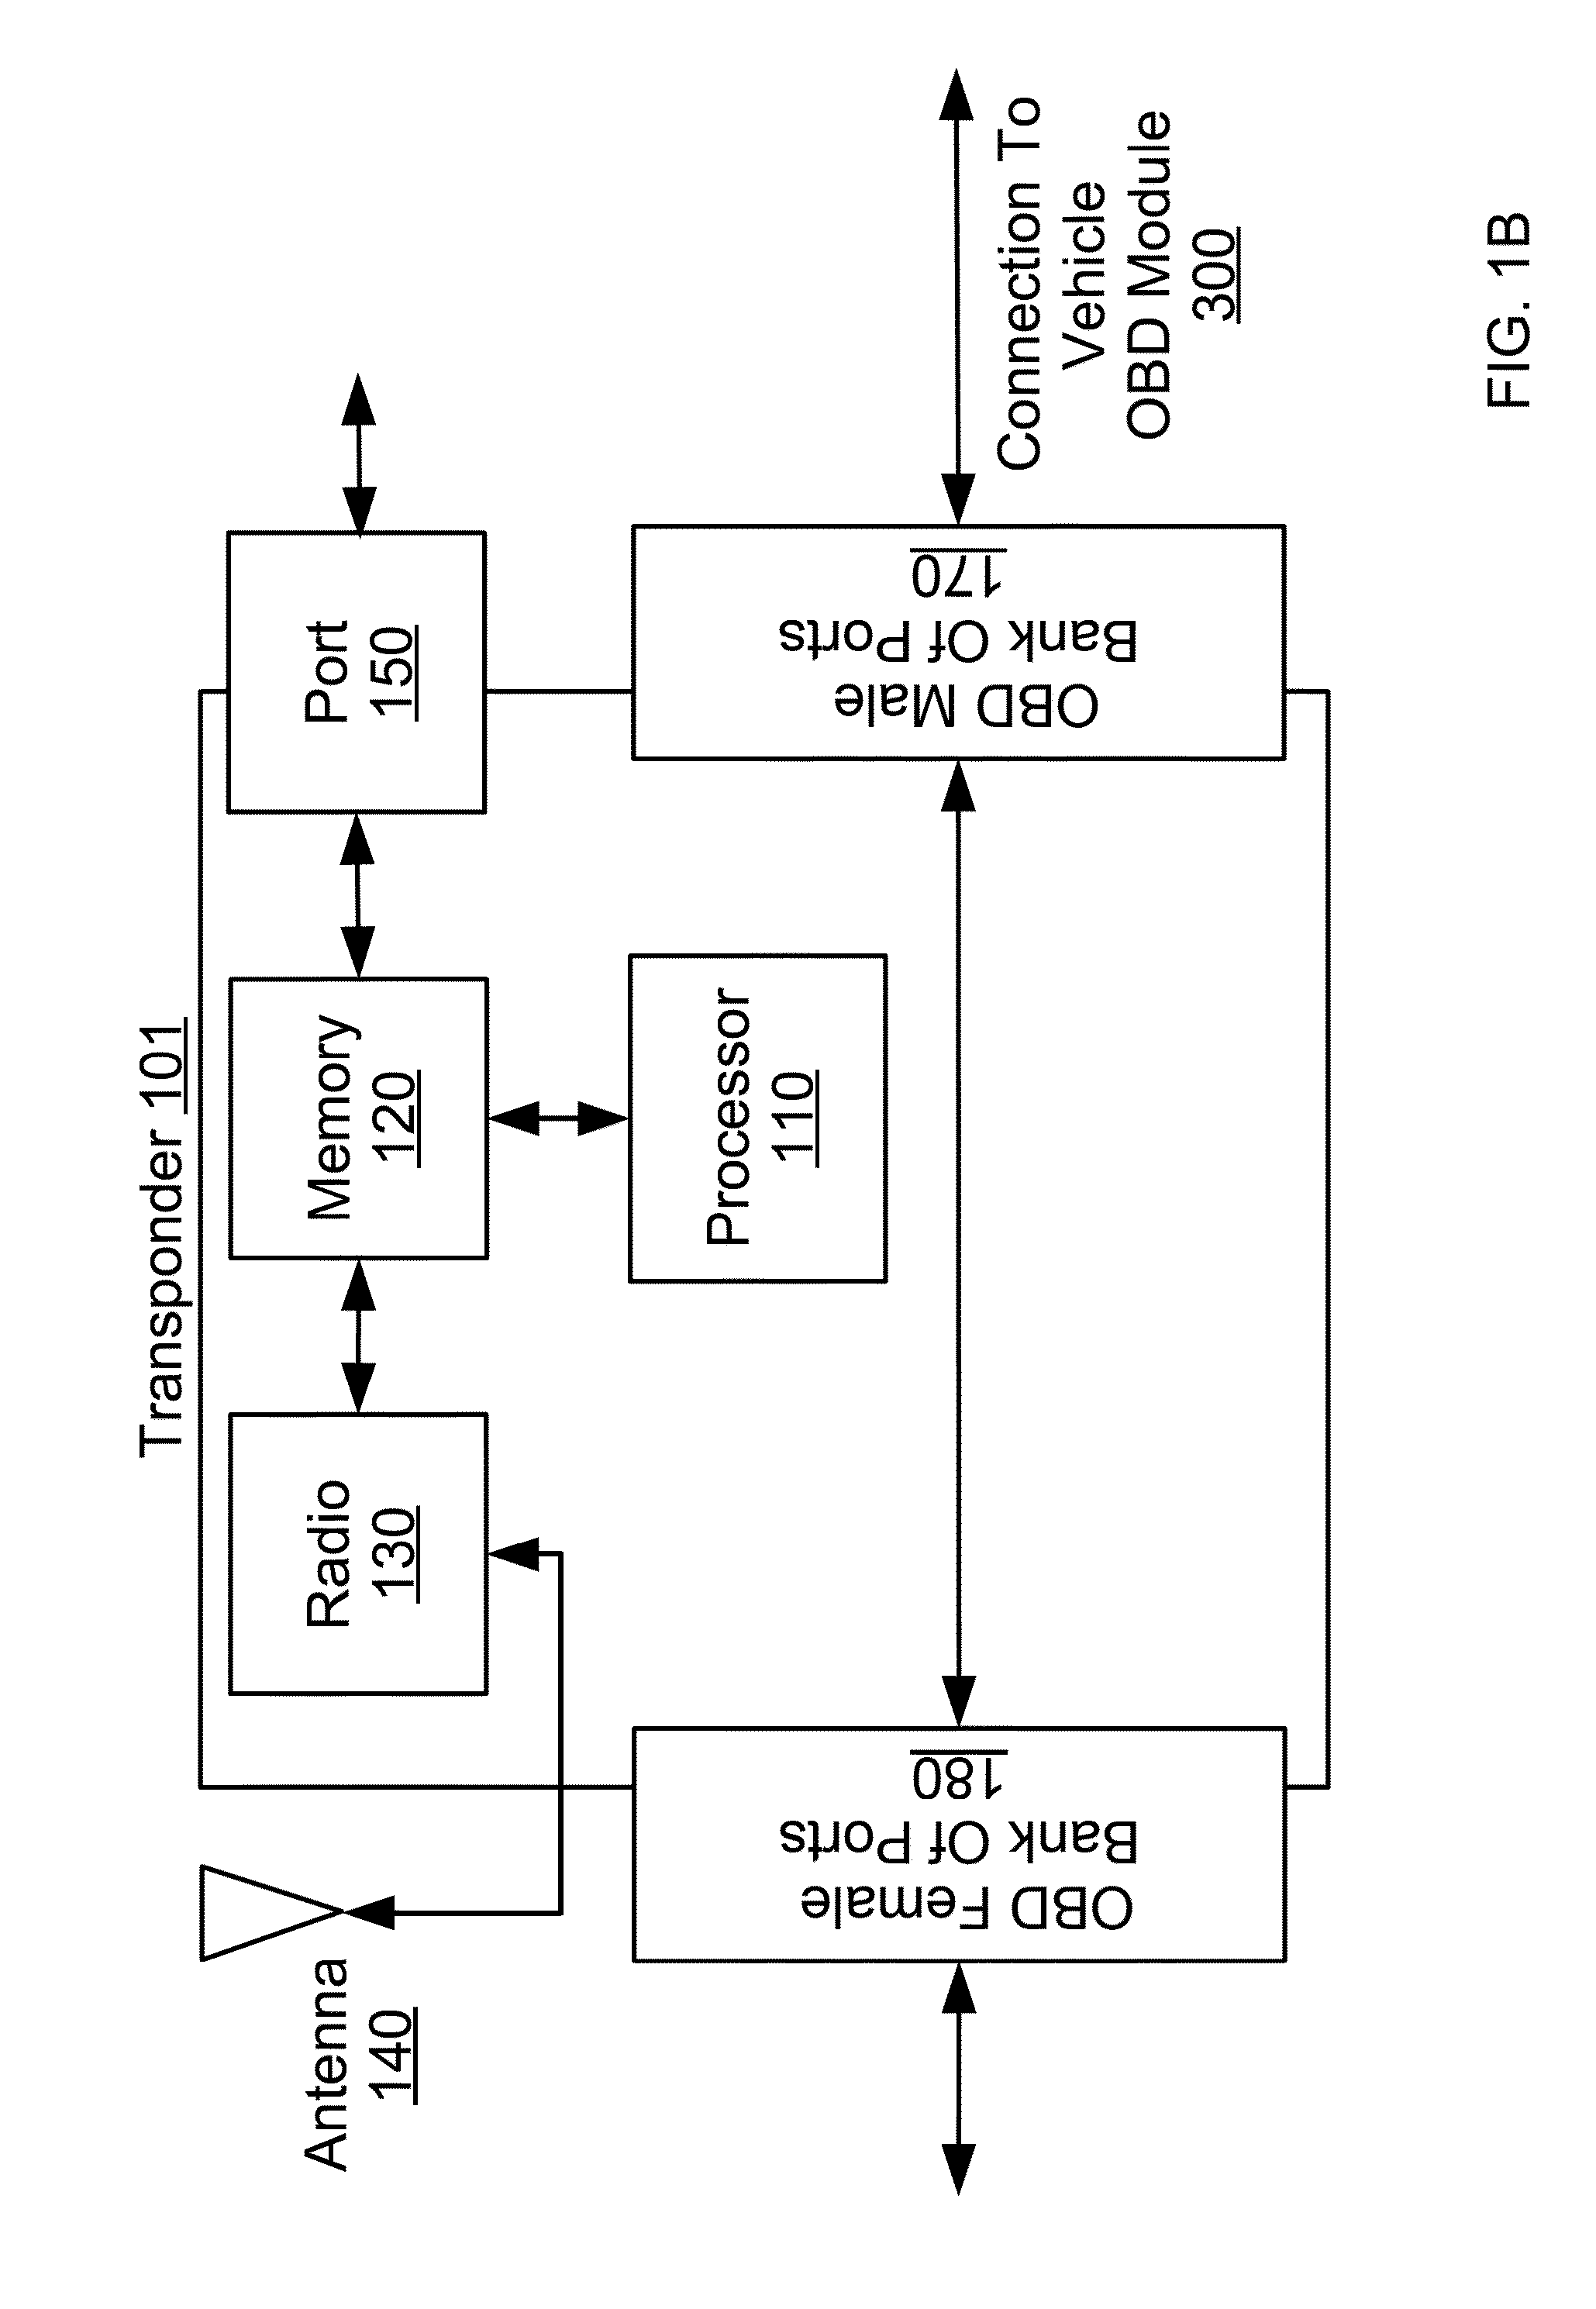 System, method, and apparatus for identifying and authenticating the presence of high value assets at remote locations